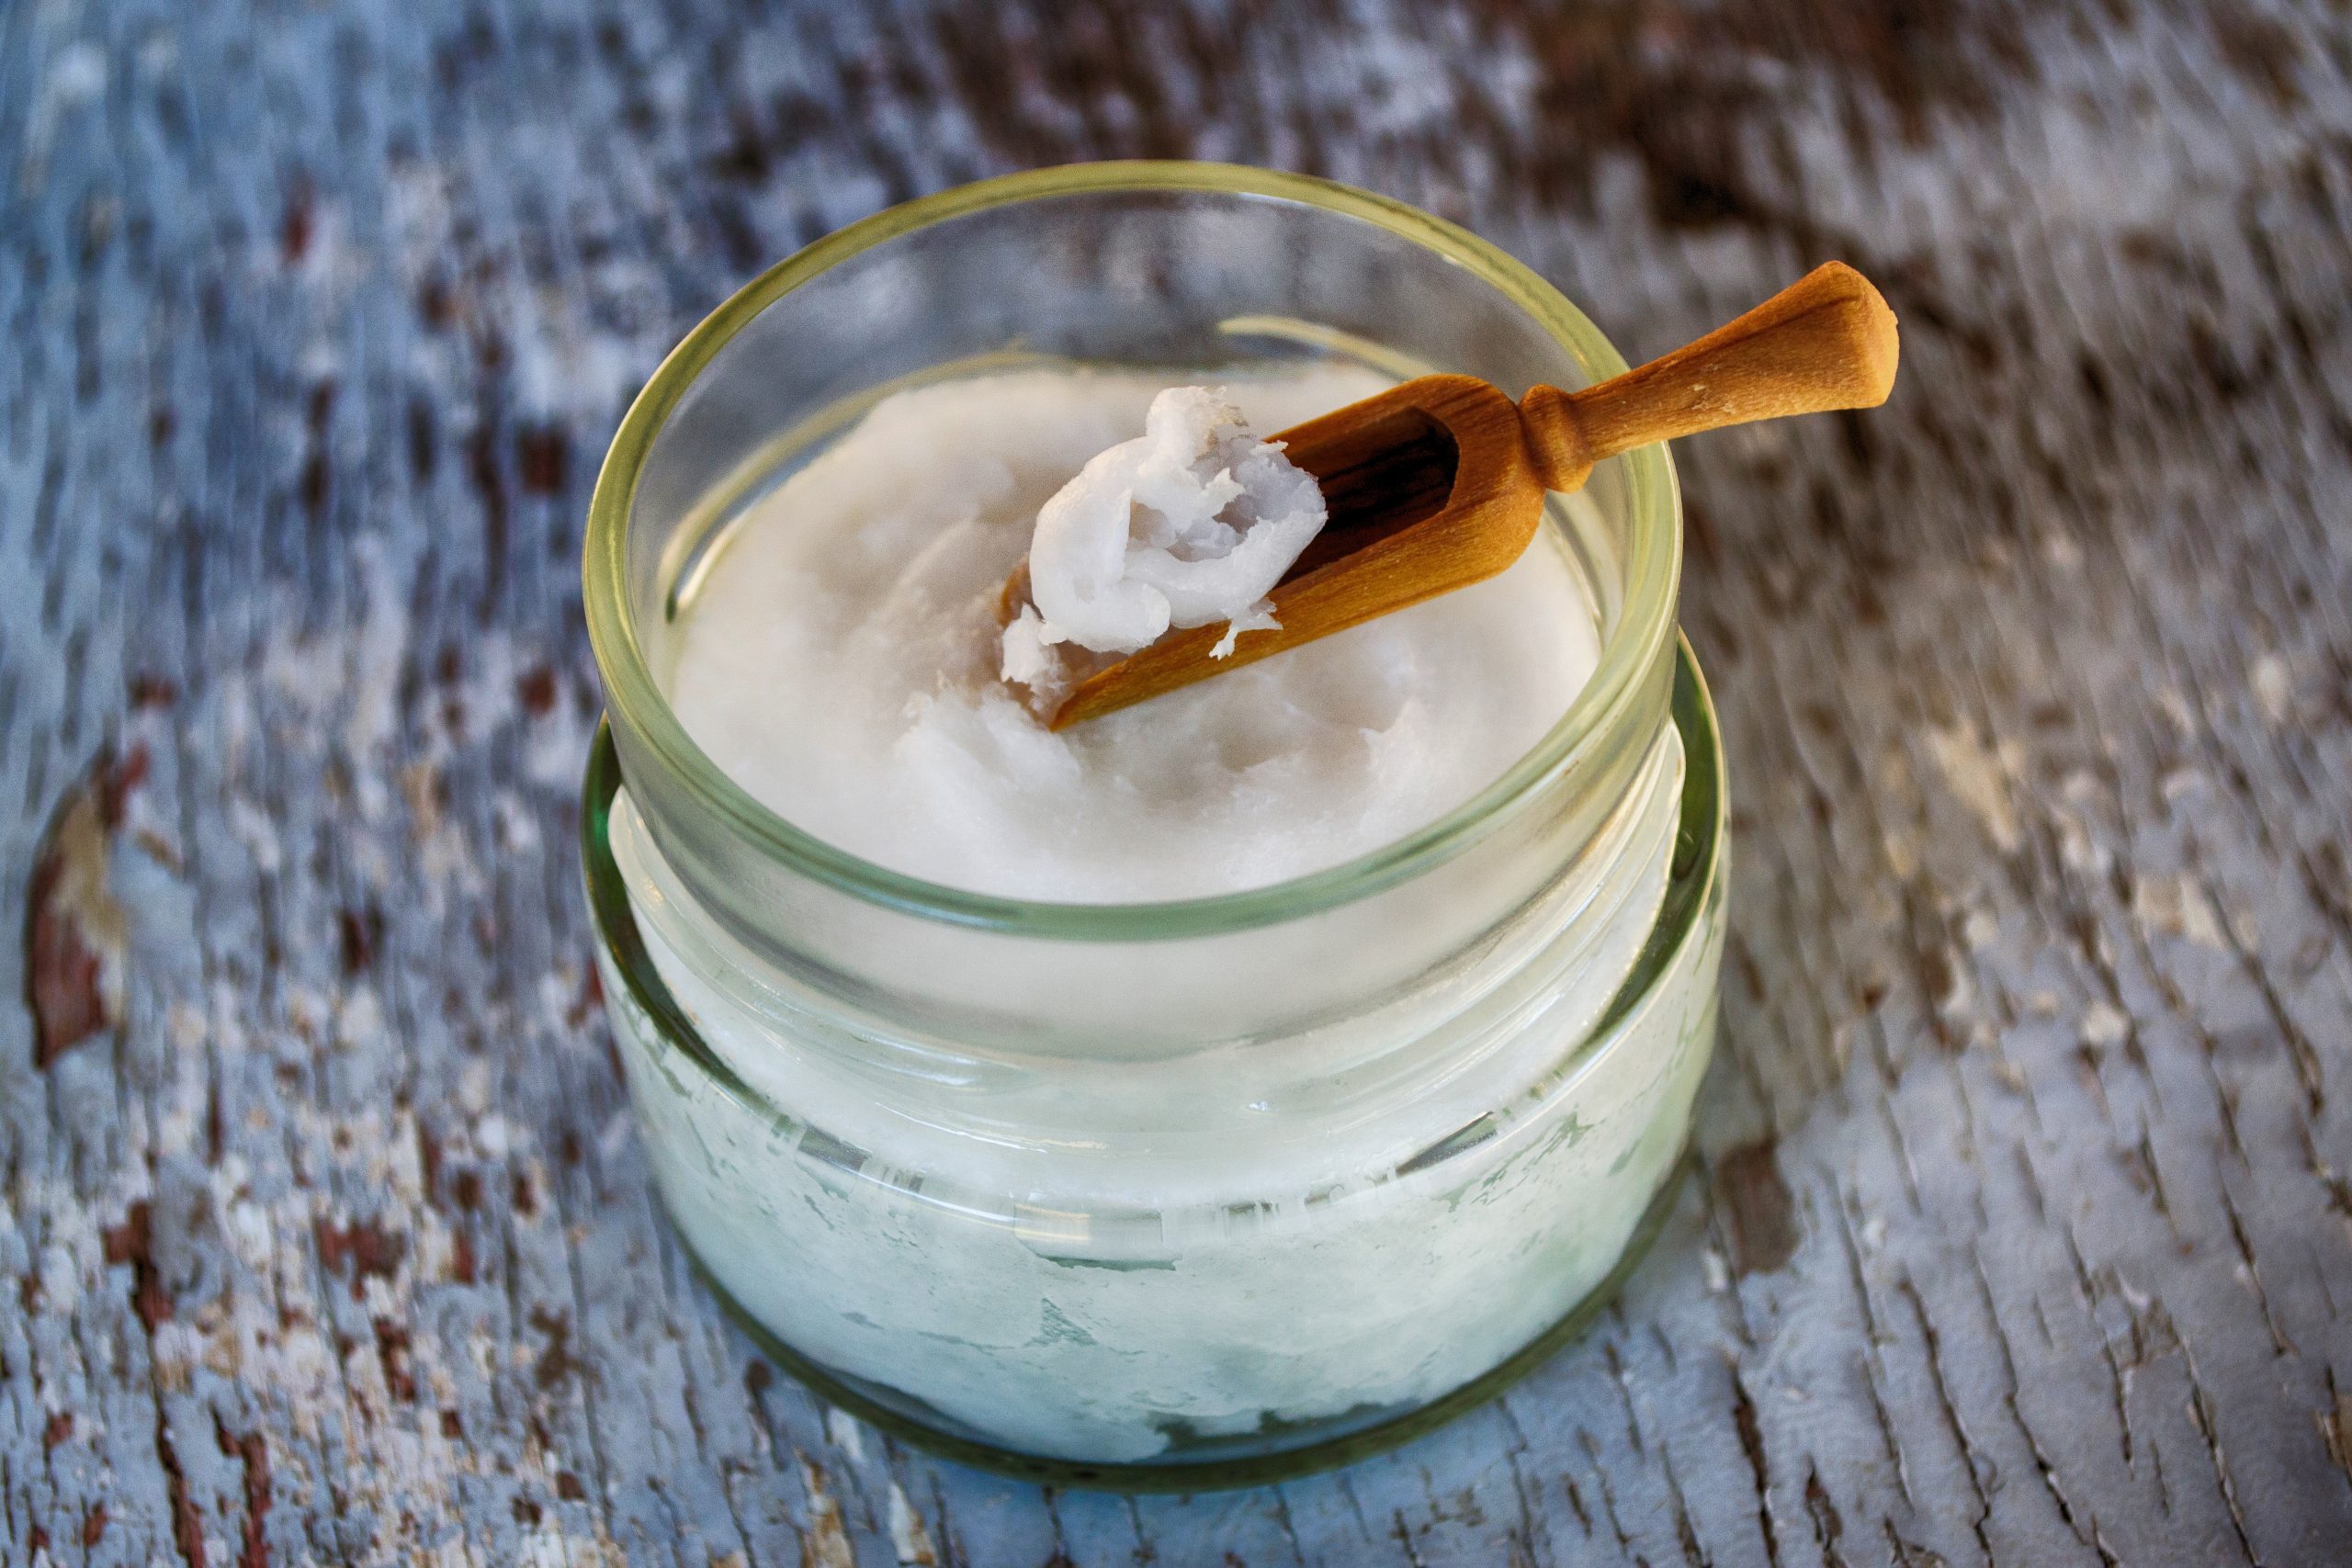 Coconut Butter Vs Coconut Oil: What’s The Difference?